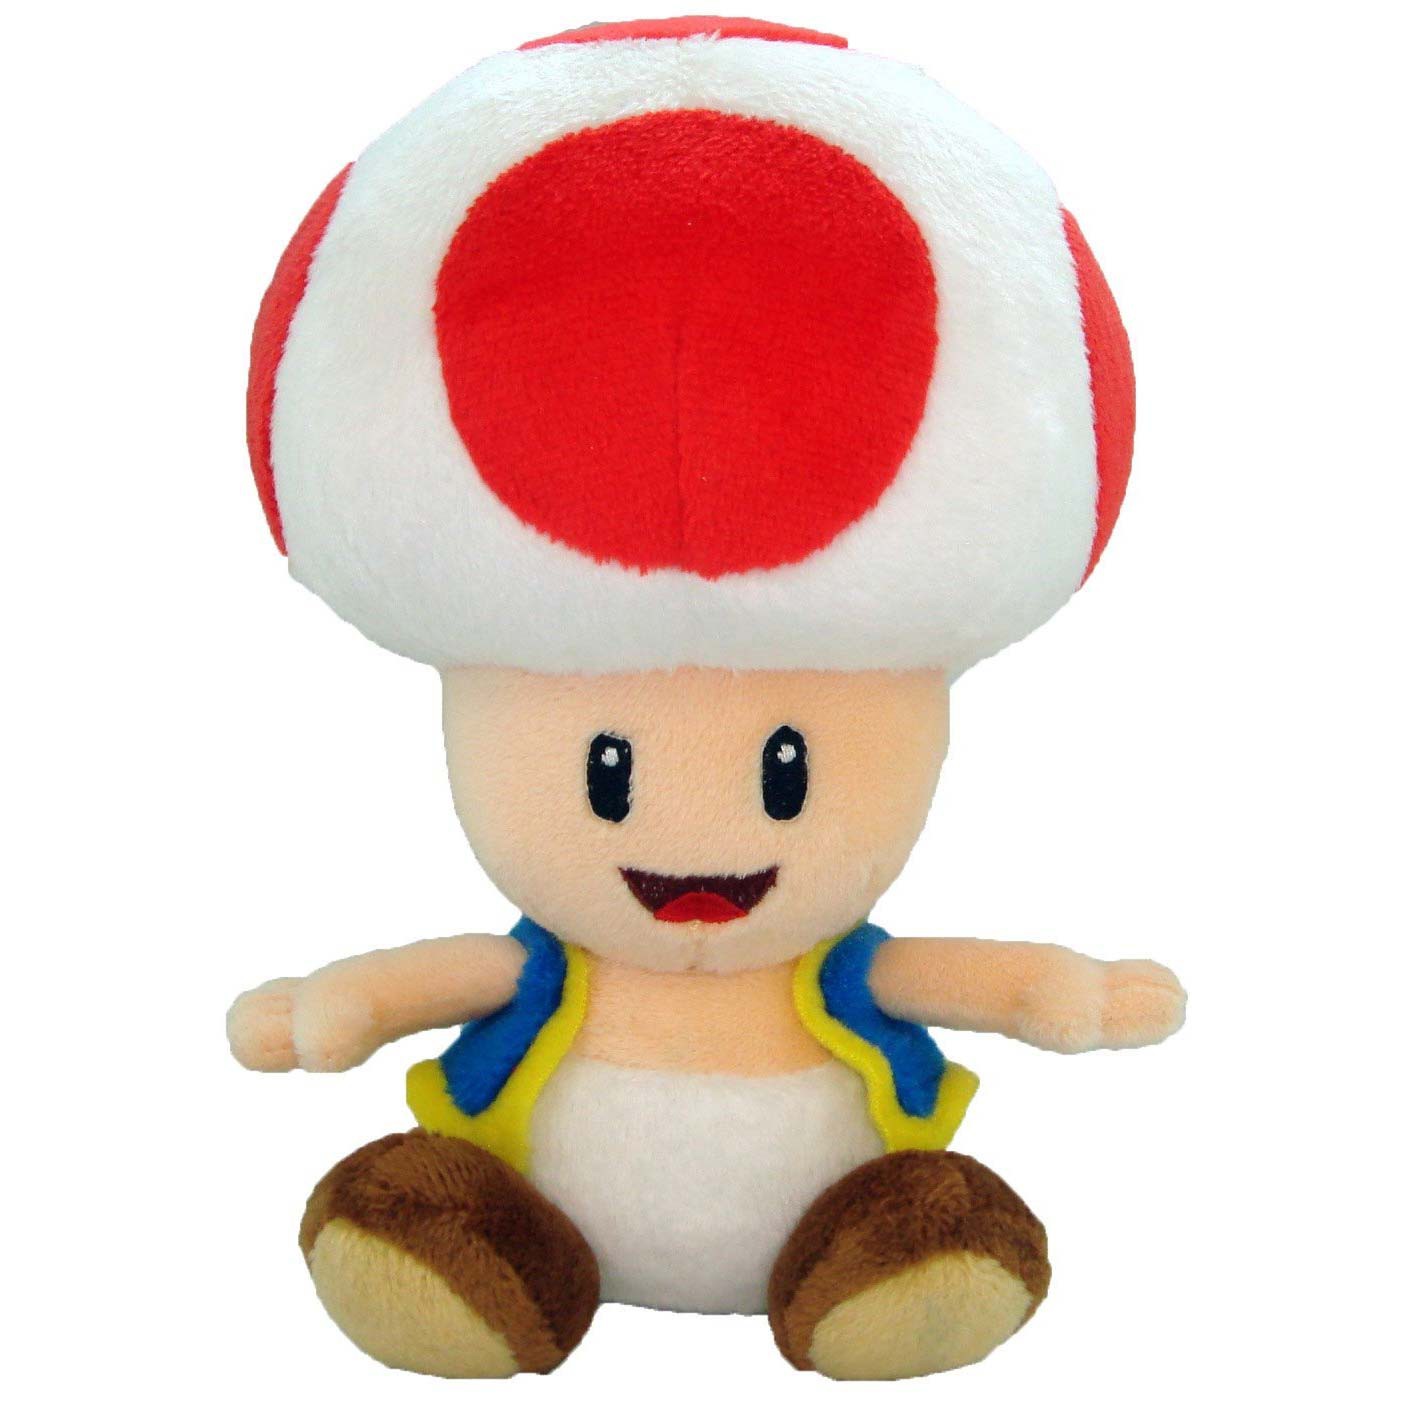 Super Mario Bros. Toad 7in Plush Doll Toy